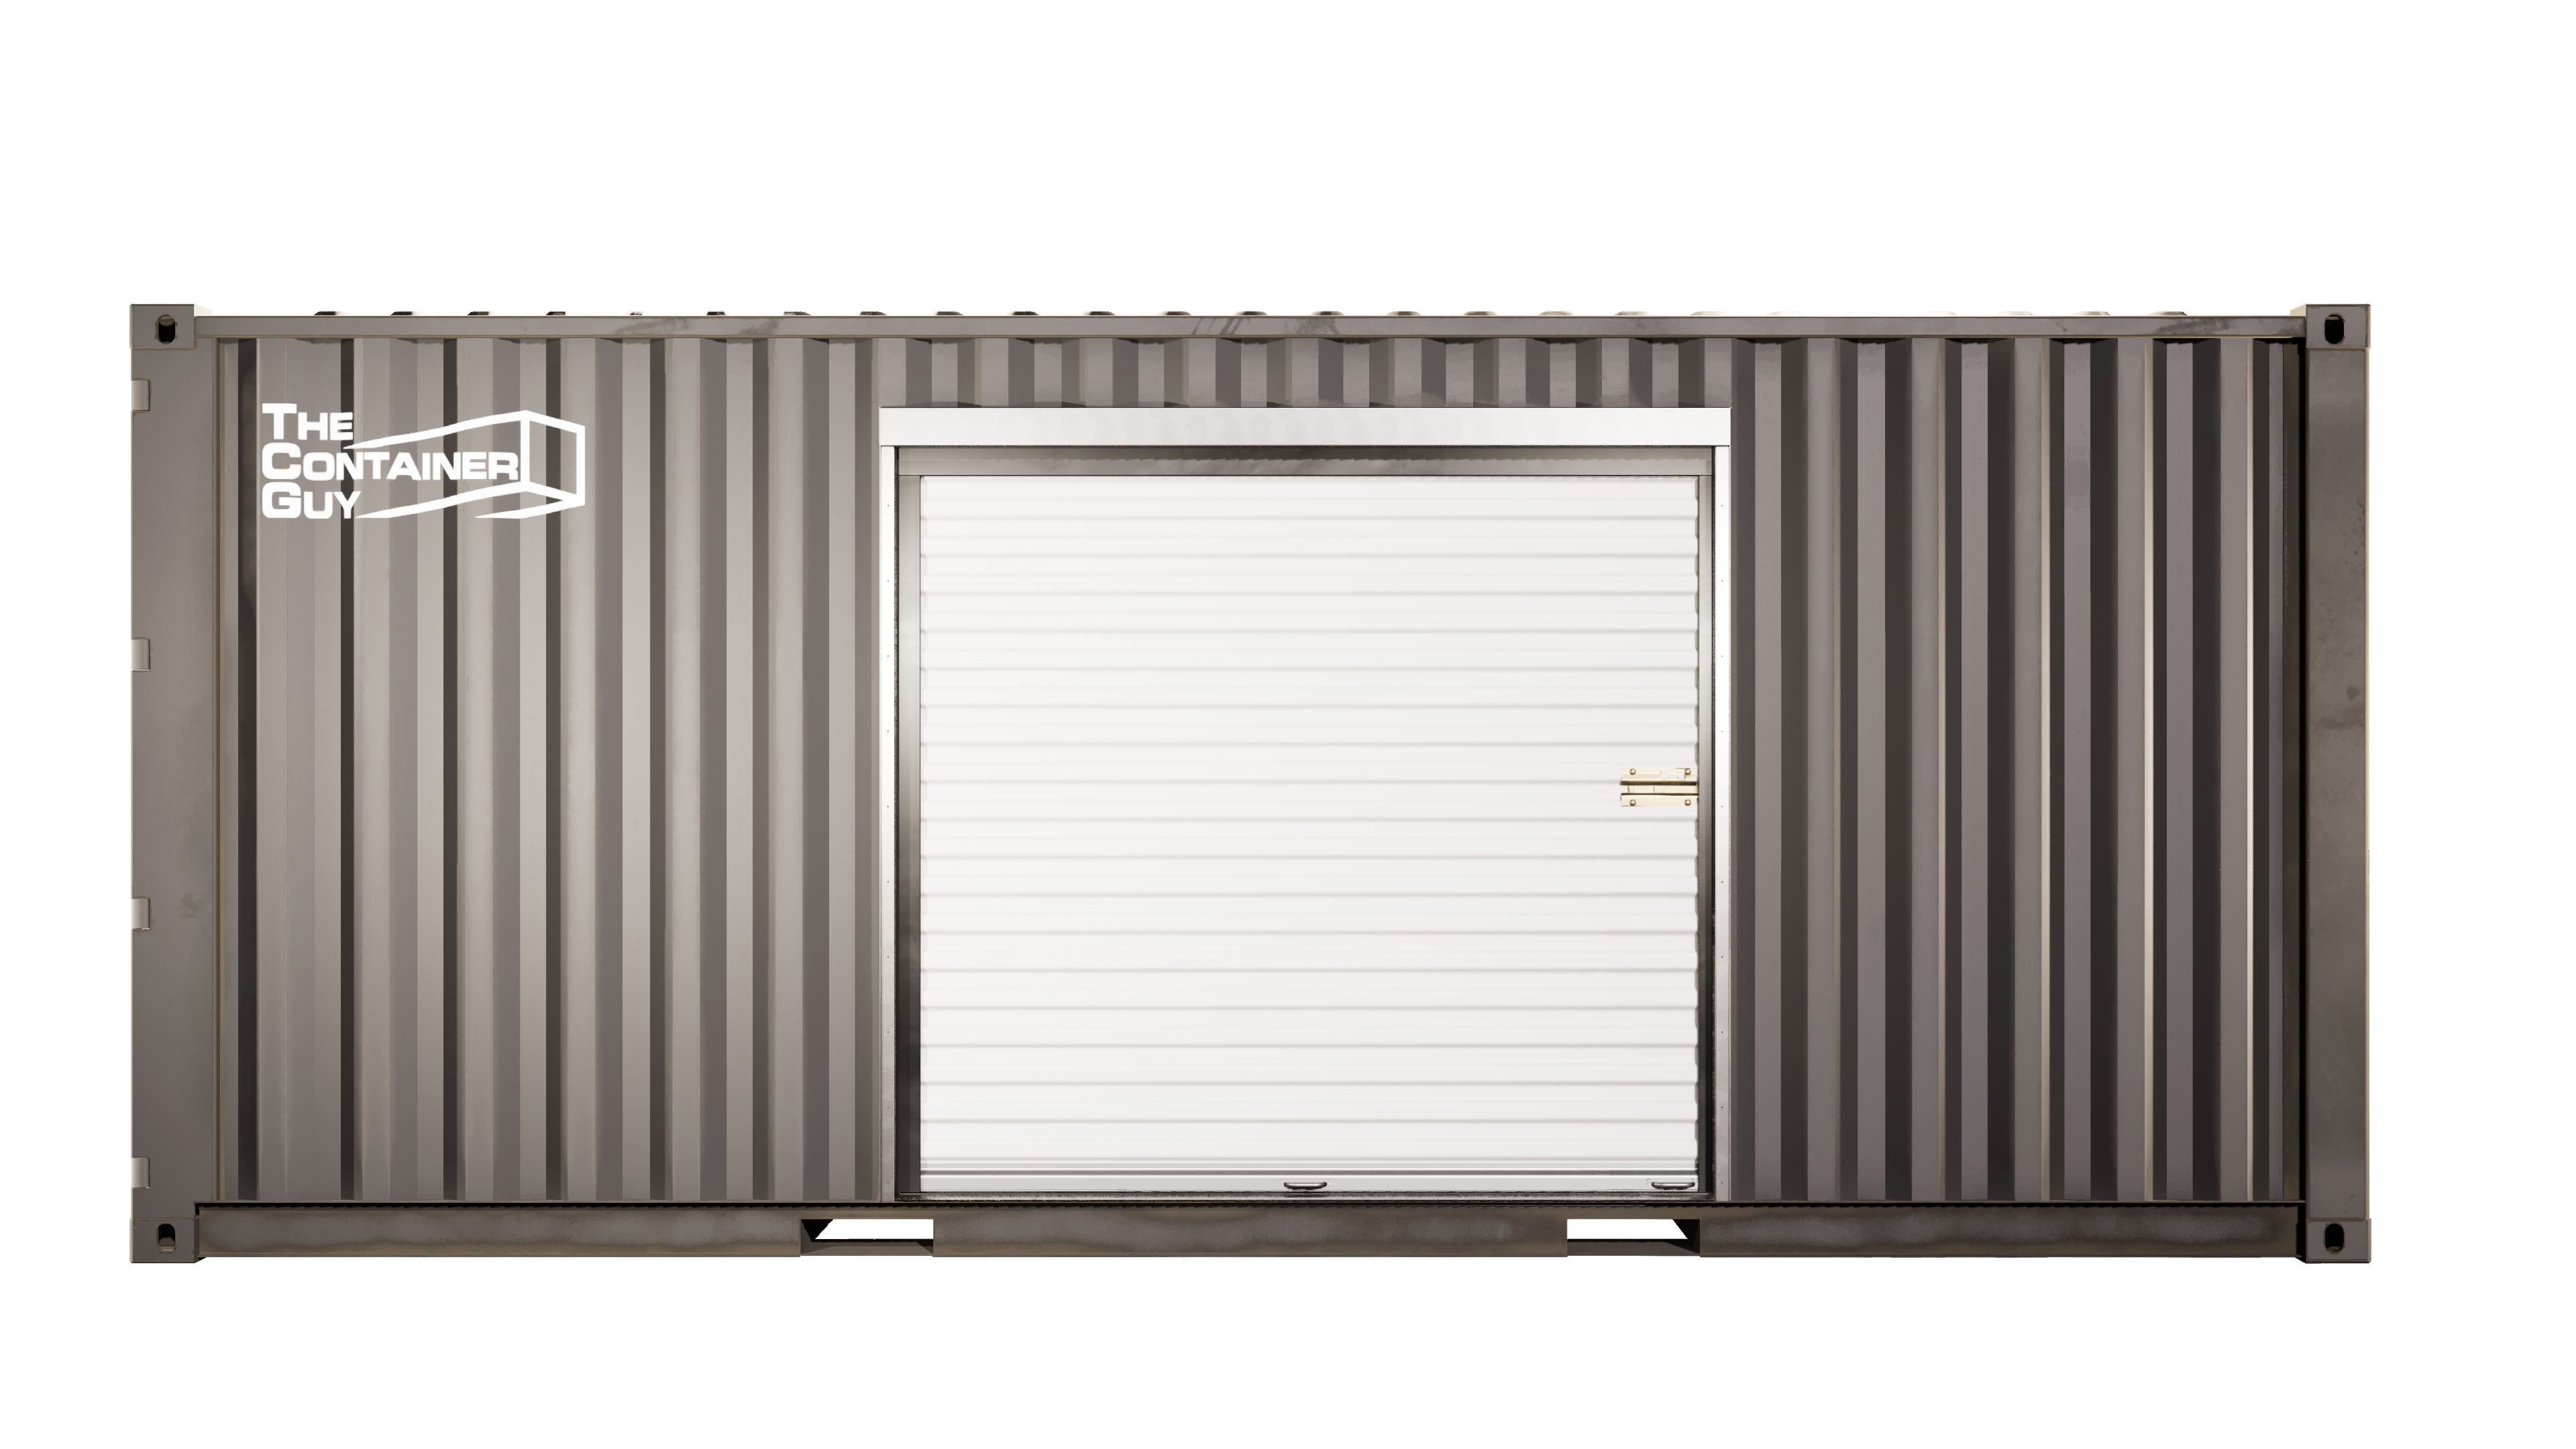 Standard Container Size (8'6" Tall Container) Side Wall Roll Up Door Framing Kits - Door Not Included (Please contact us before placing order so we can provide accurate shipping quote)